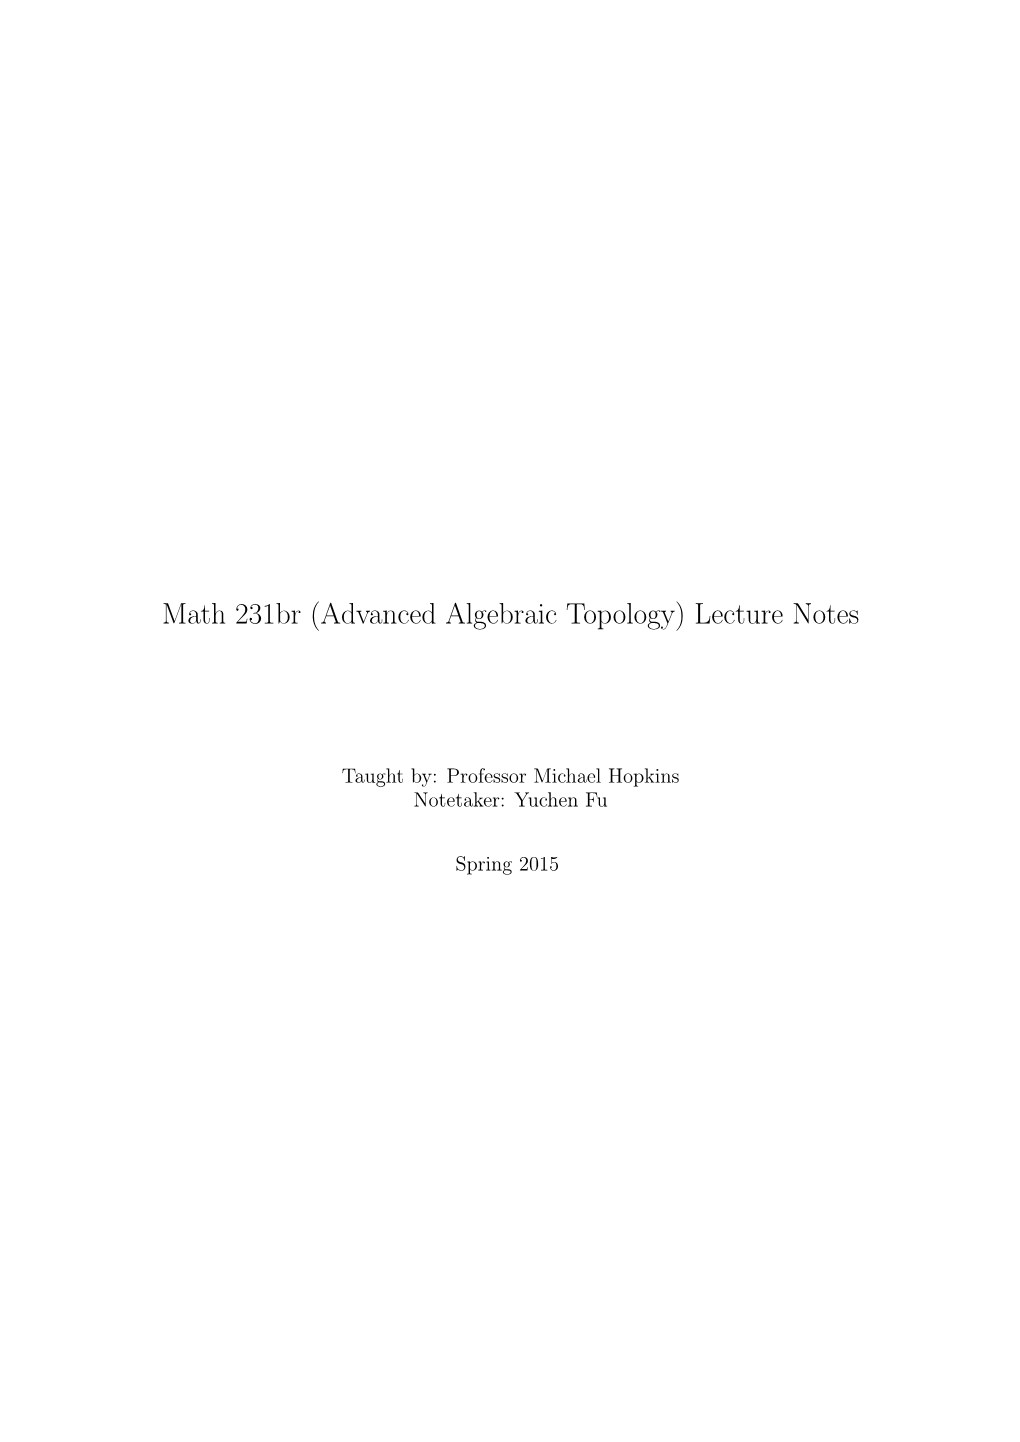 (Advanced Algebraic Topology) Lecture Notes